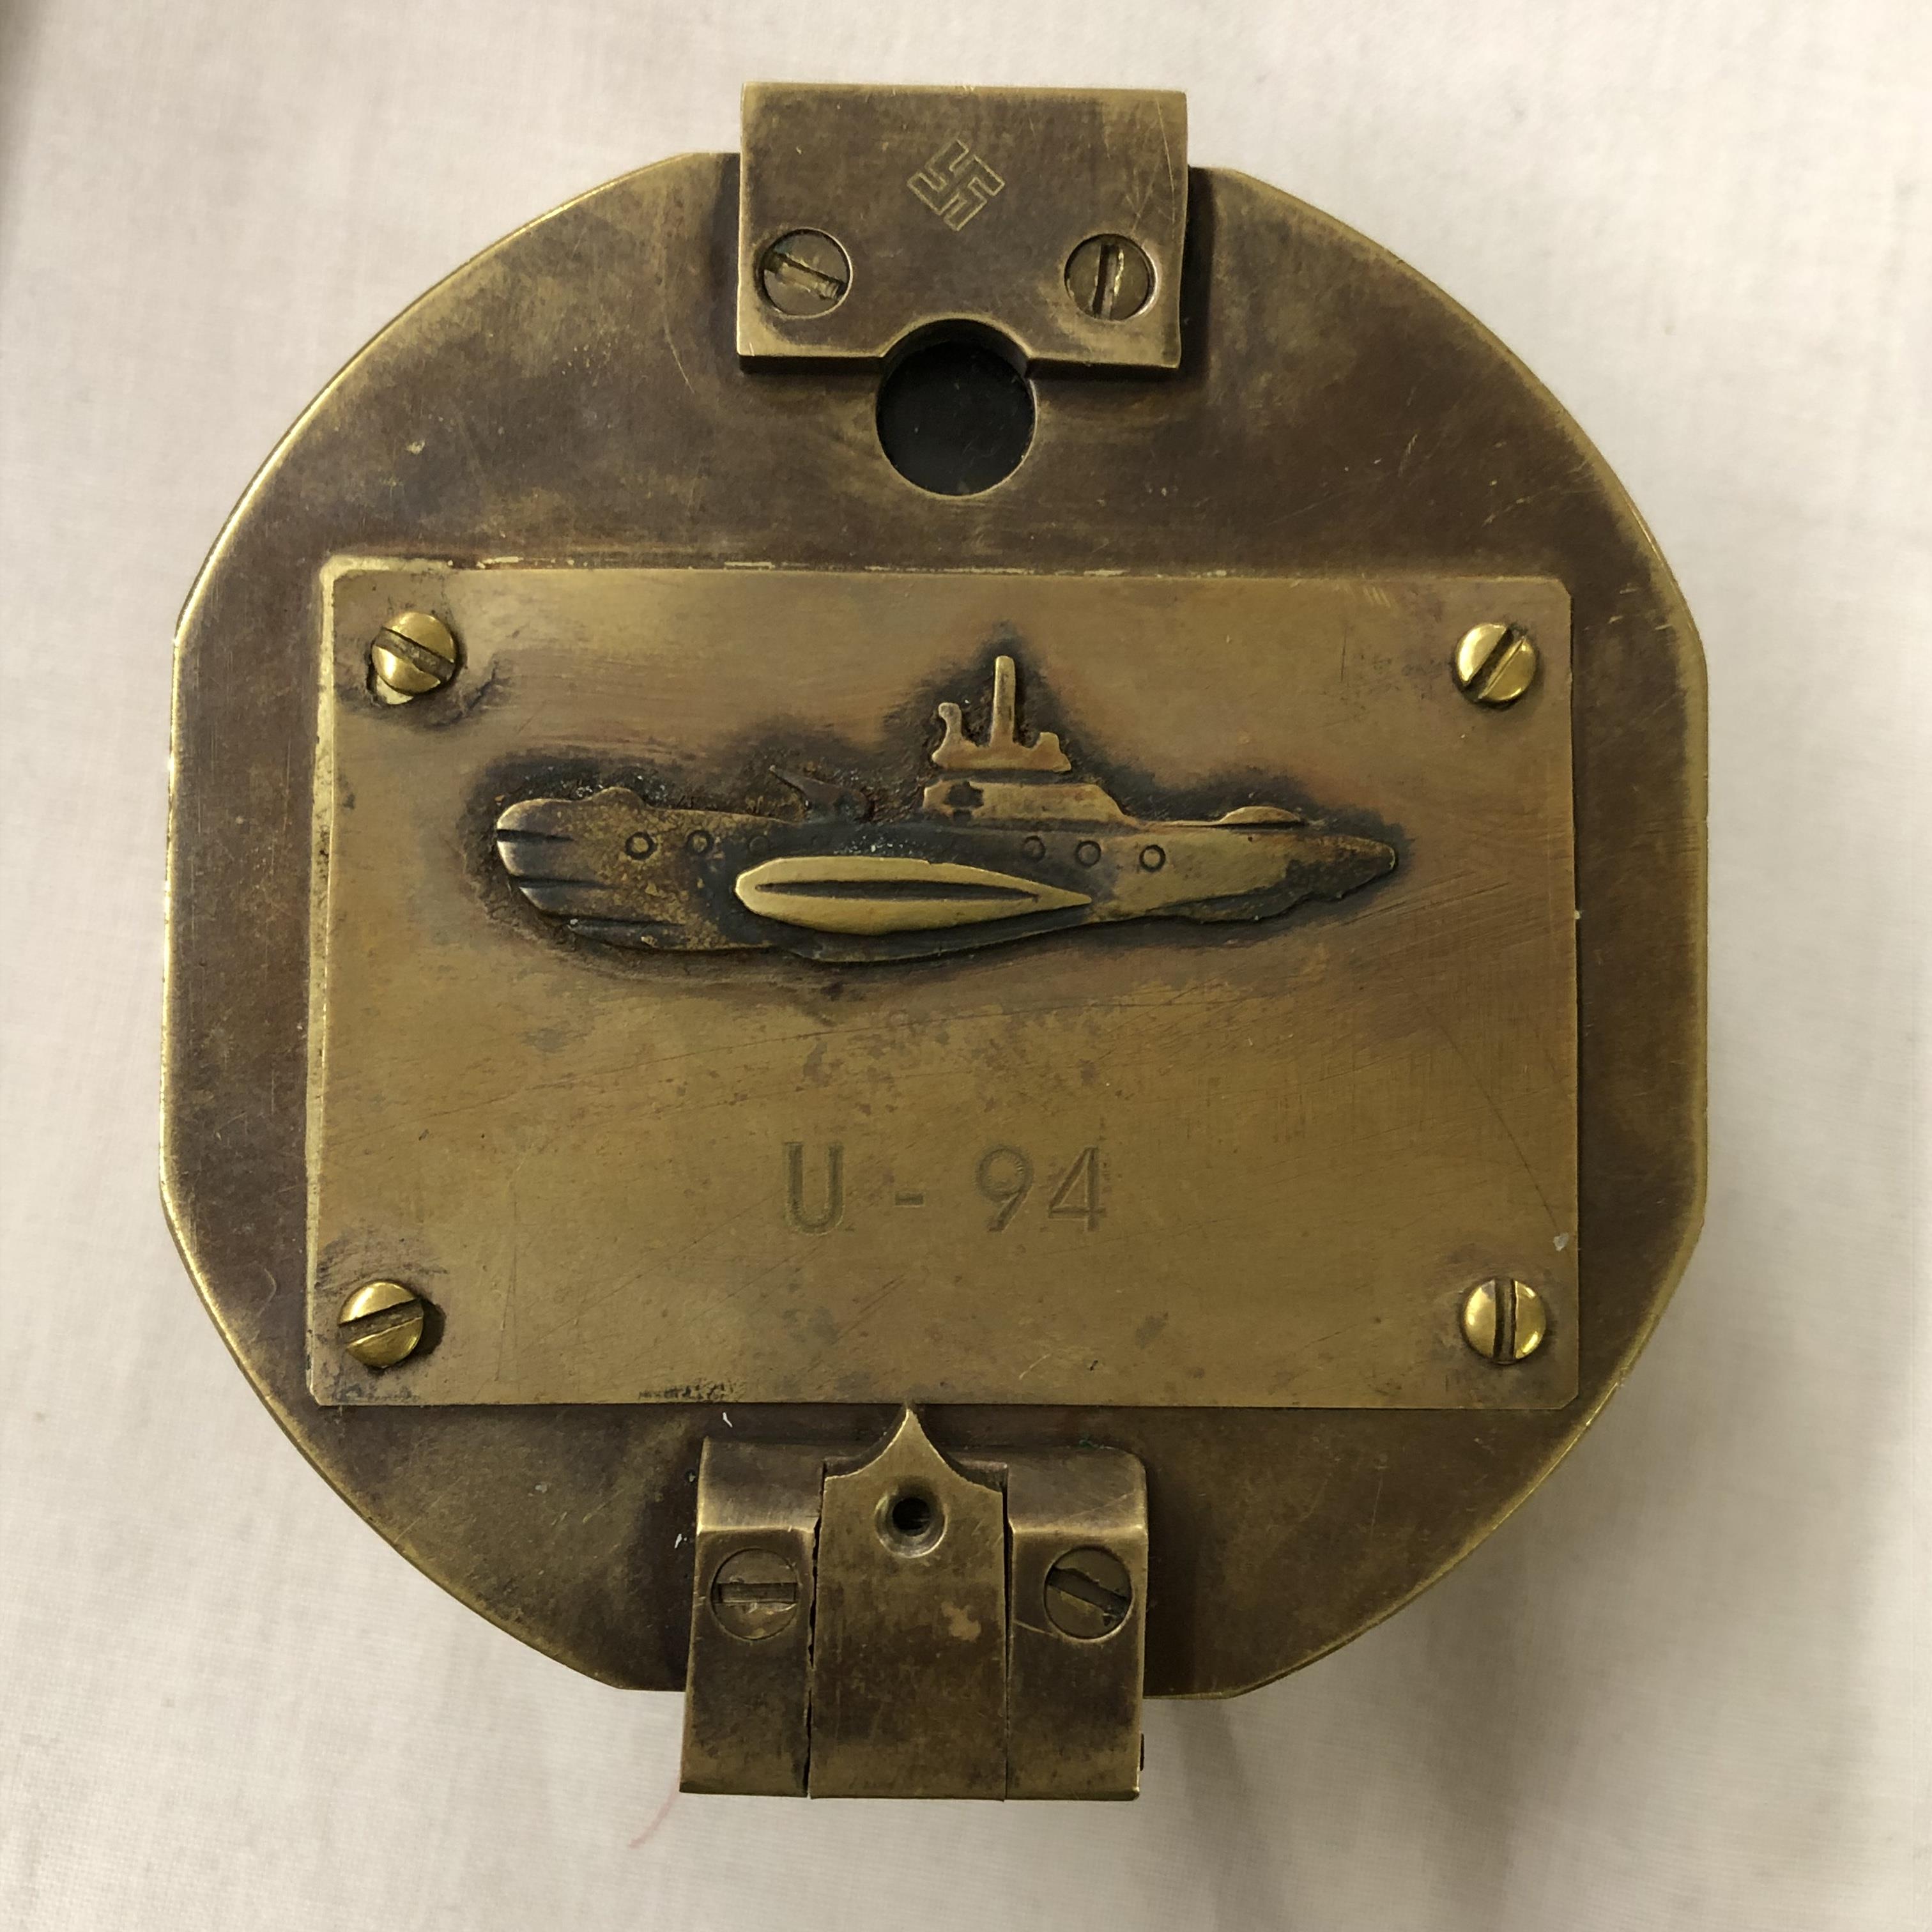 REPRODUCTION U94 COMPASS IN BOX - Image 6 of 9